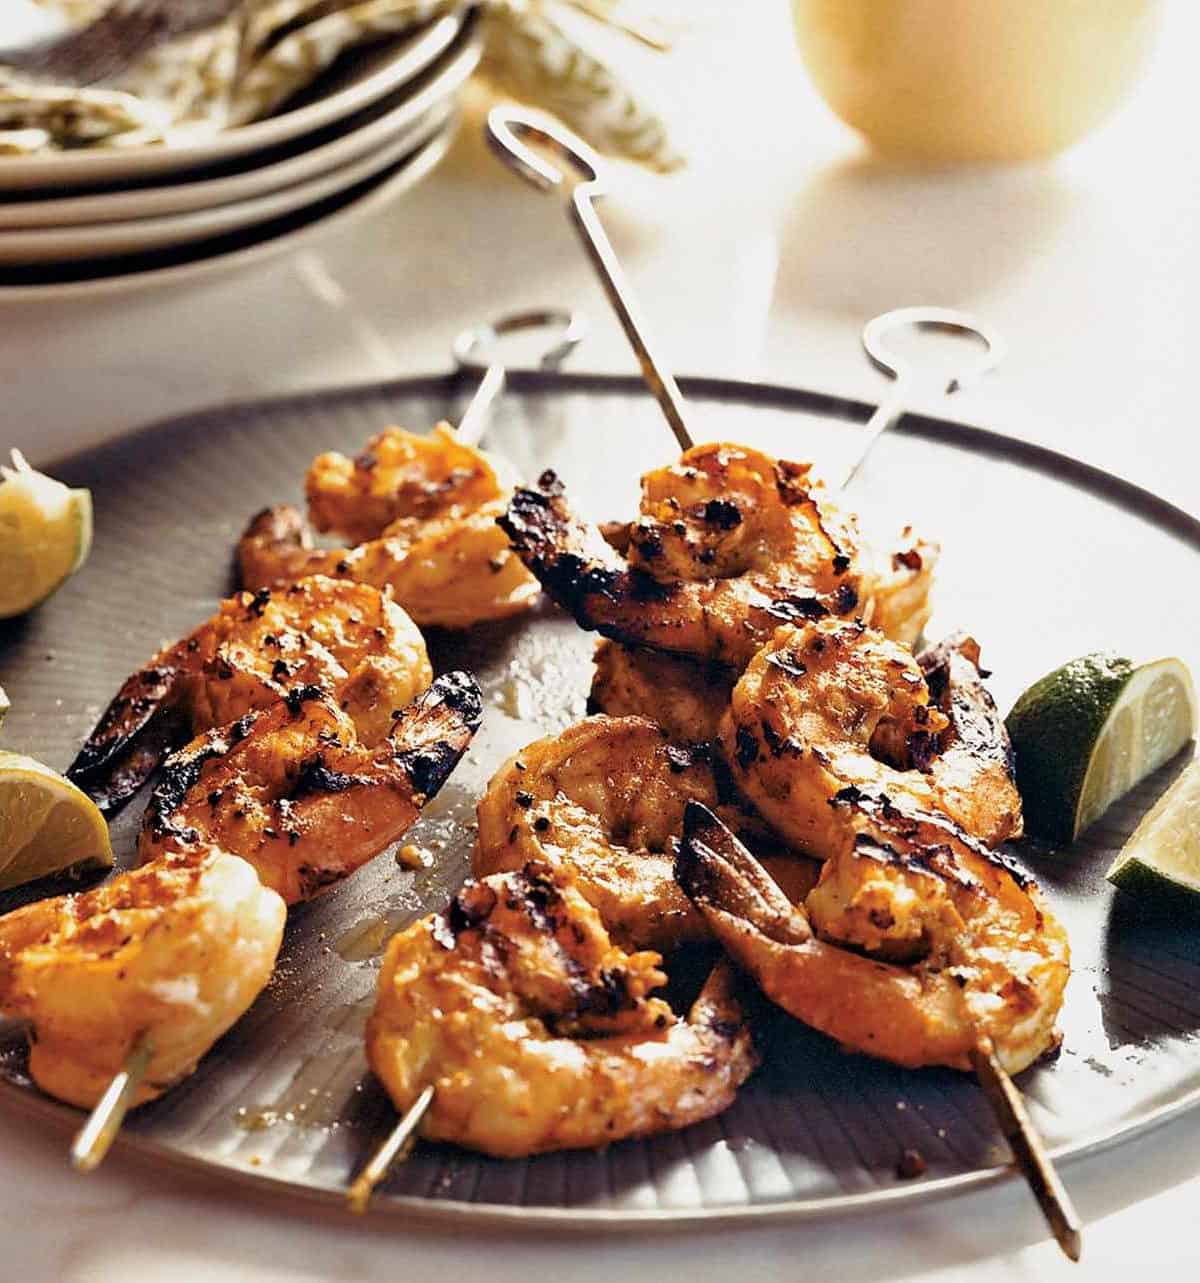  Fire up the grill and get ready for Indian grilled sour cream-marinated shrimp.